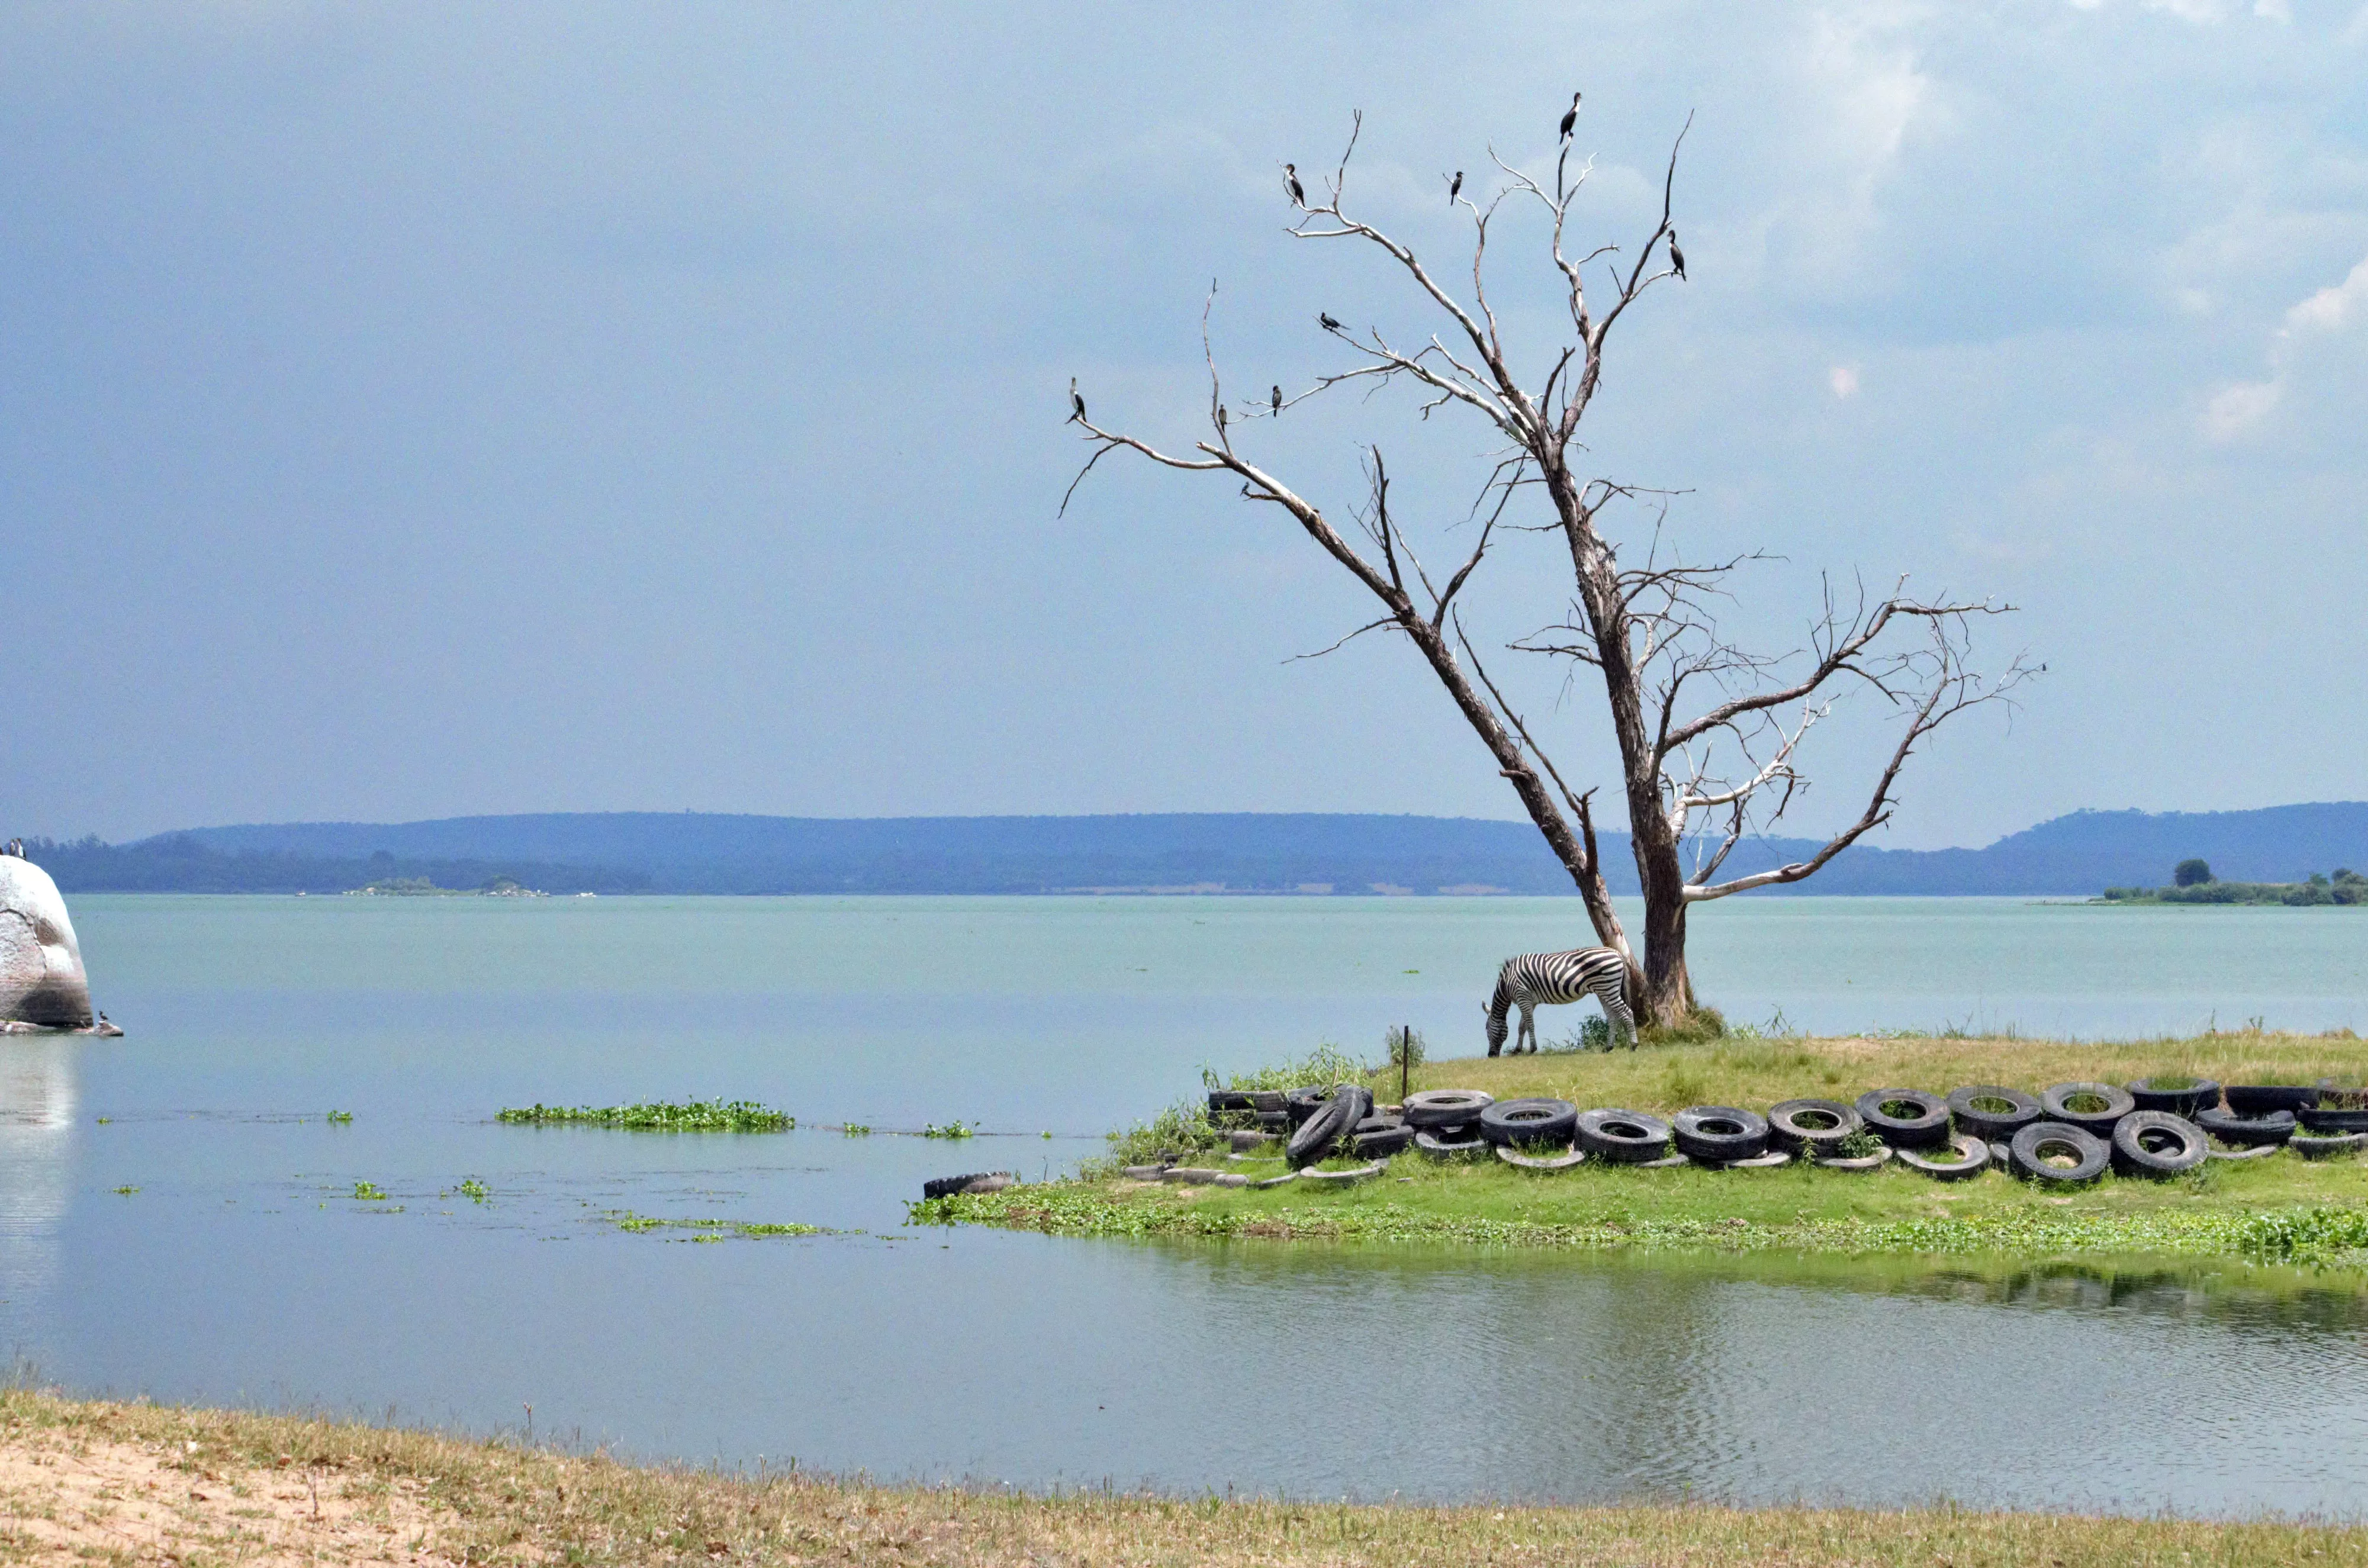 Lake Chivero Recreational Park in Zimbabwe, Africa | Parks,Lakes - Rated 3.2